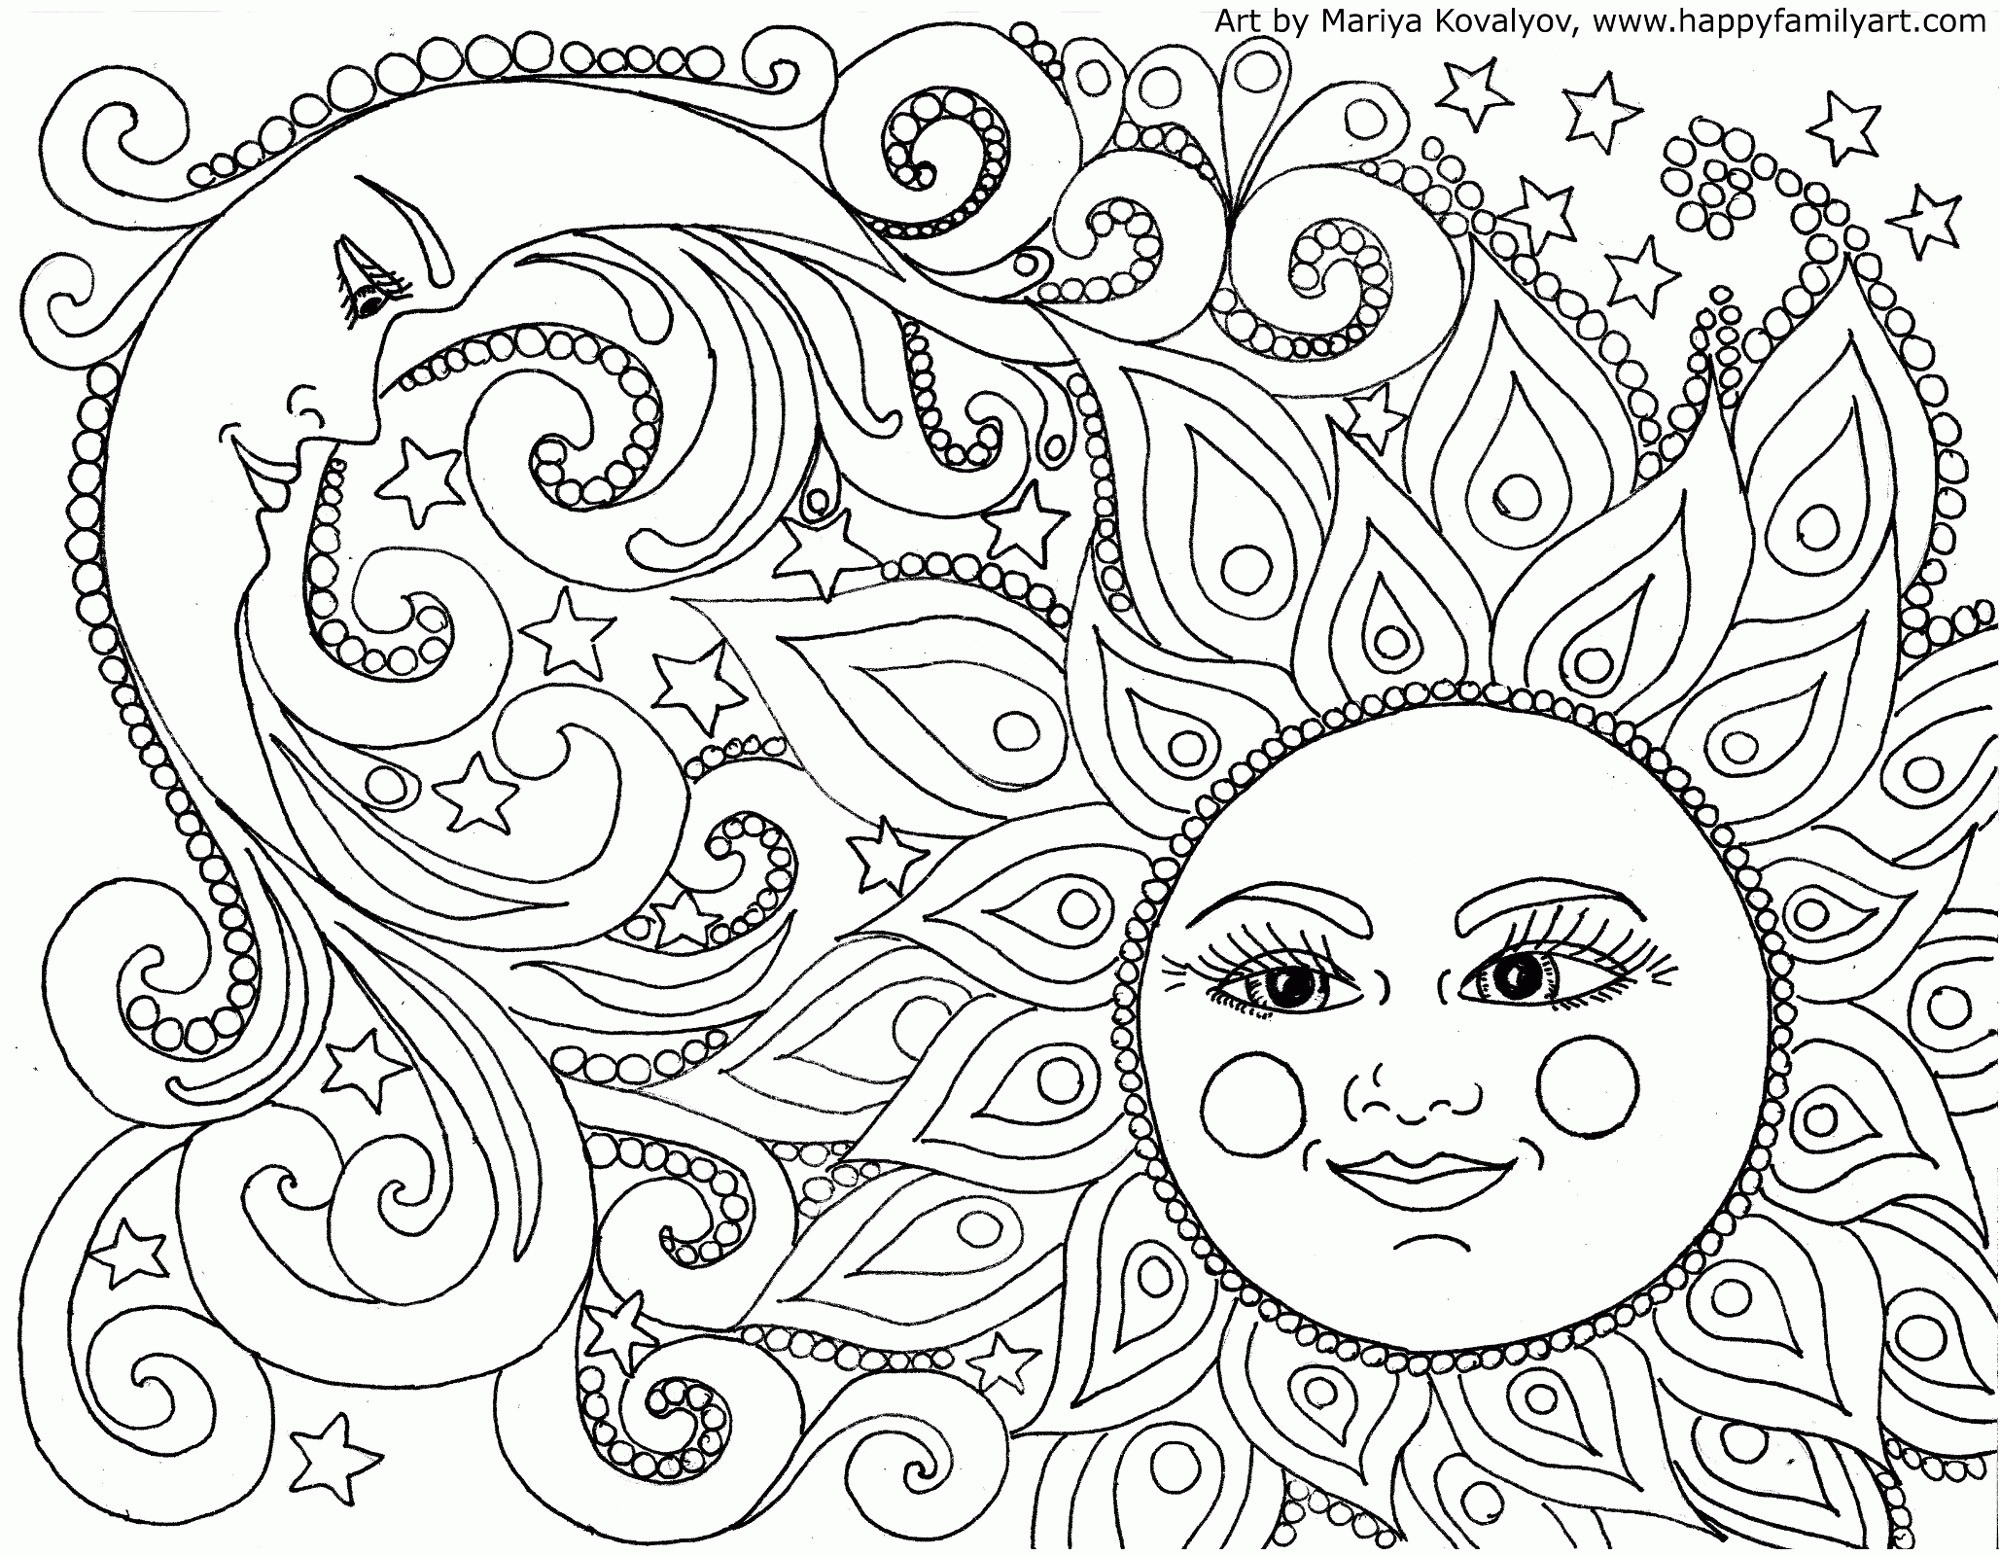 Beautiful Nature Coloring Pages Coloring Ideas Tremendous Cutela Coloring Pages Ideas The Truth